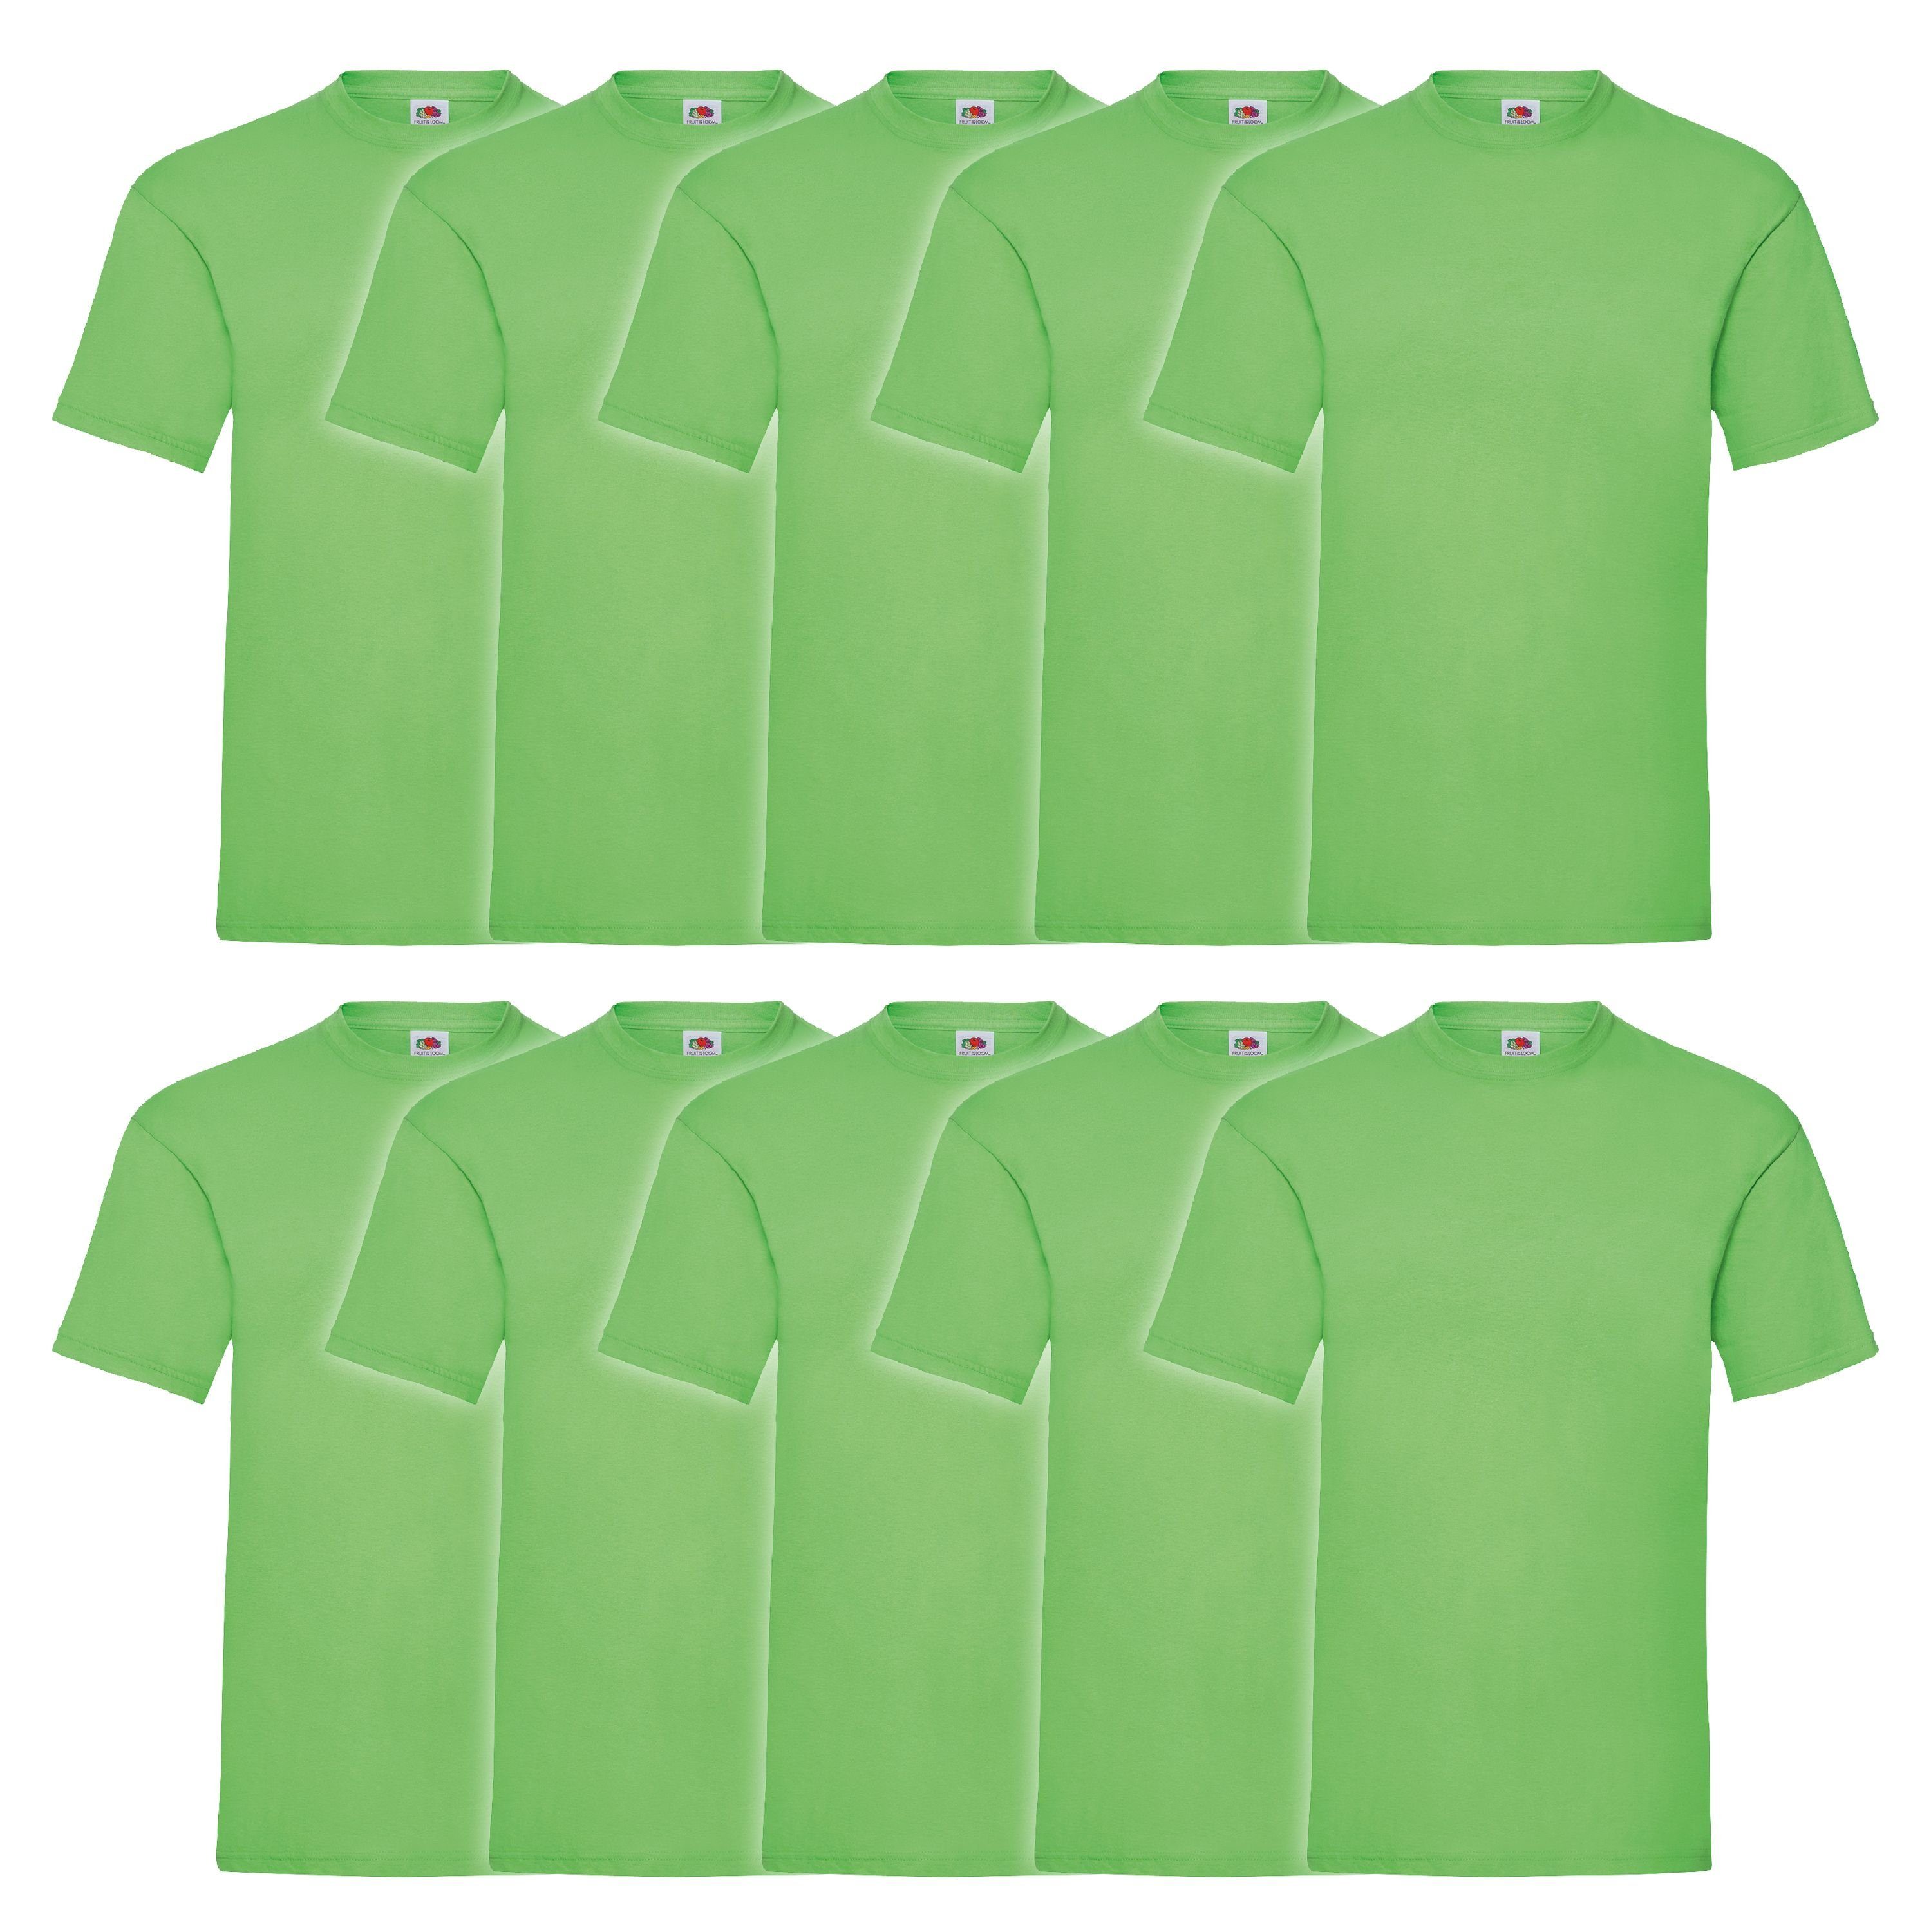 Rundhalsshirt Fruit of of Loom 10er Pack the Valueweight T Loom lime Fruit the